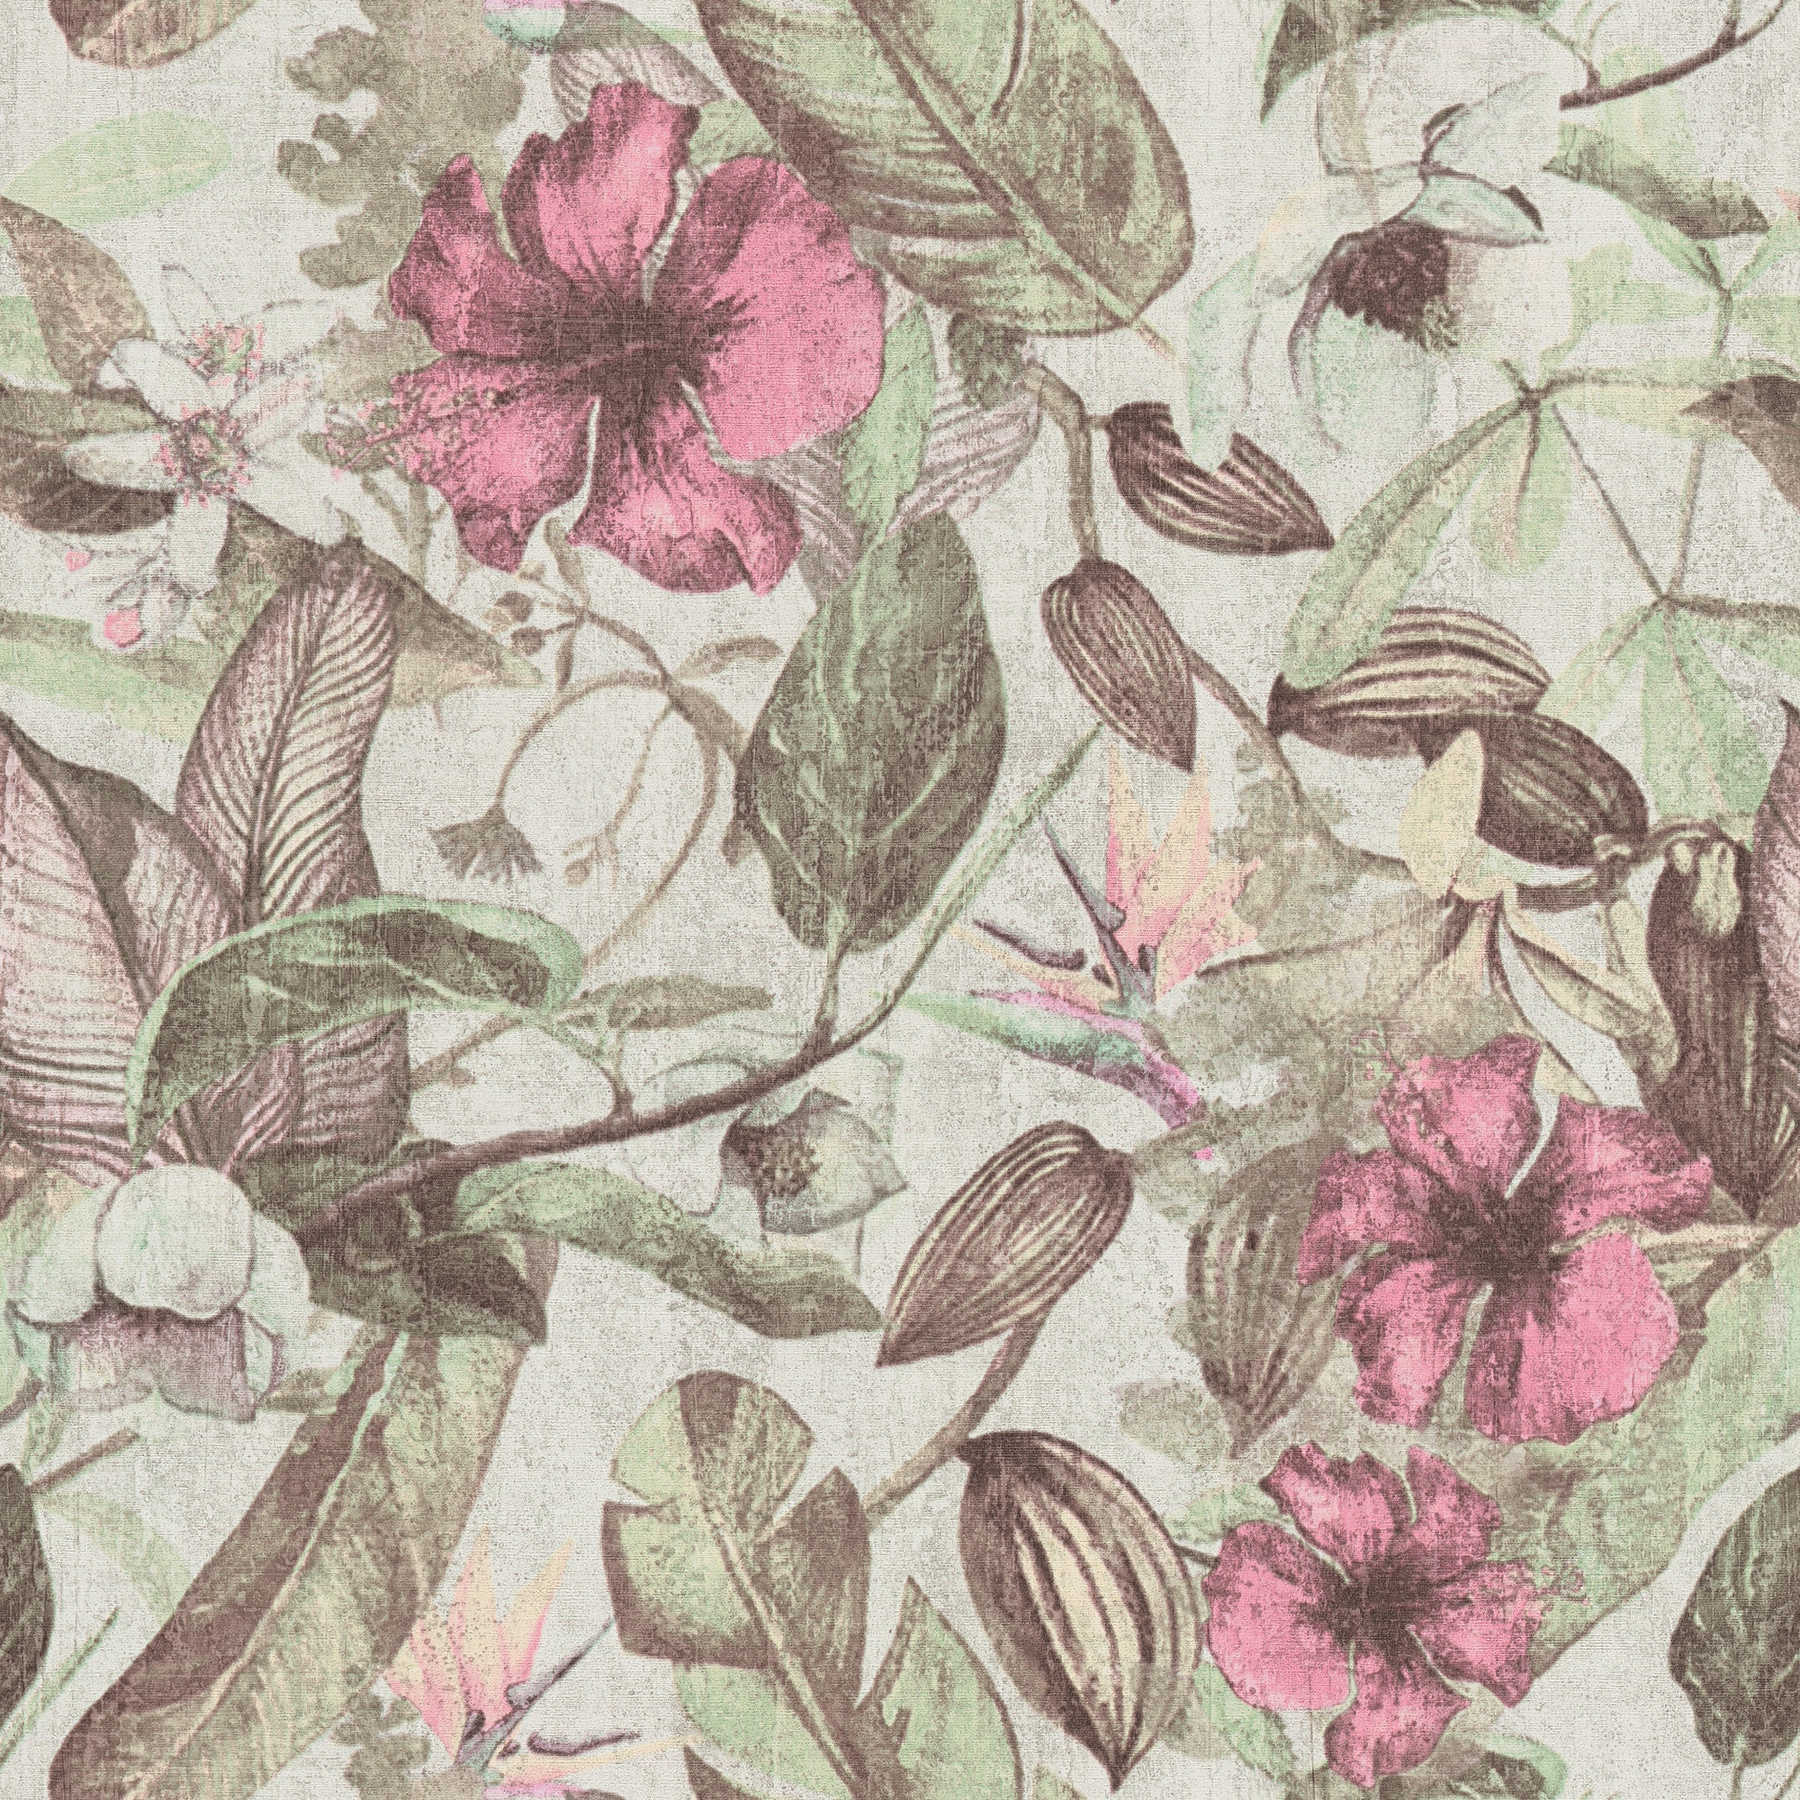 wallpaper floral pattern, tropical style & textile look - pink, green, brown
